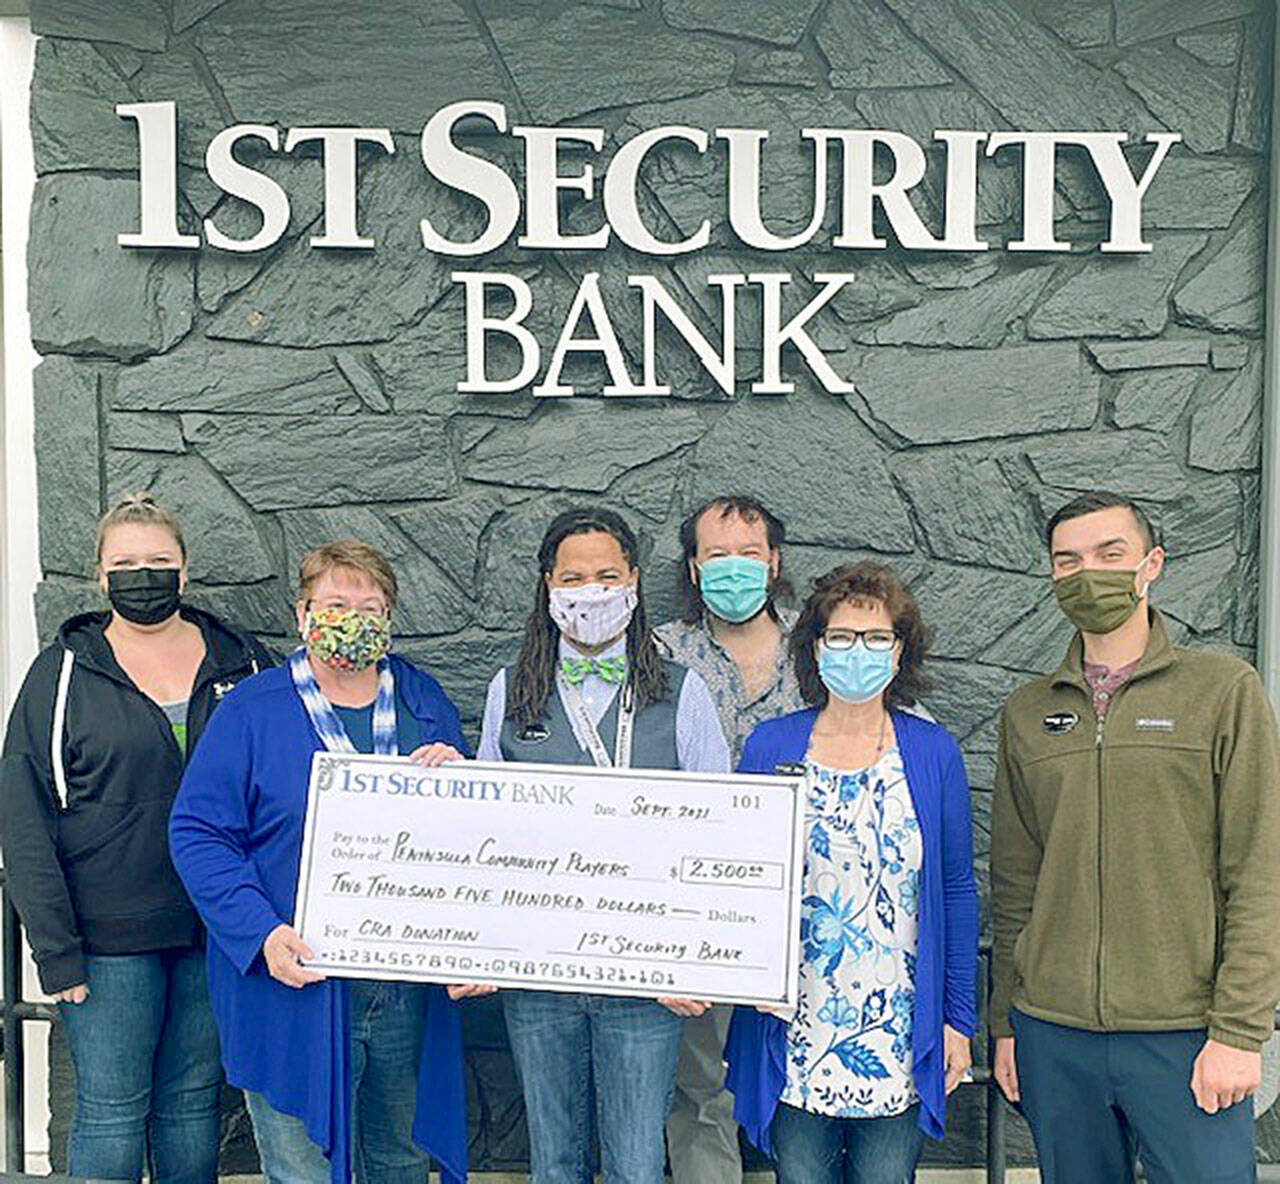 The Port Angeles Branch of 1st Security Bank has donated $2,500 to the Port Angeles Community Players to upgrade the ventilation system in the playhouse. The improved system will make it safer for audiences at the players’ performances. Pictured, from left to right, are Stephanie McFadden, Barbara Frederick, Tyrone Beatty, Richard Stephens, Elisa Simonsen and John James.